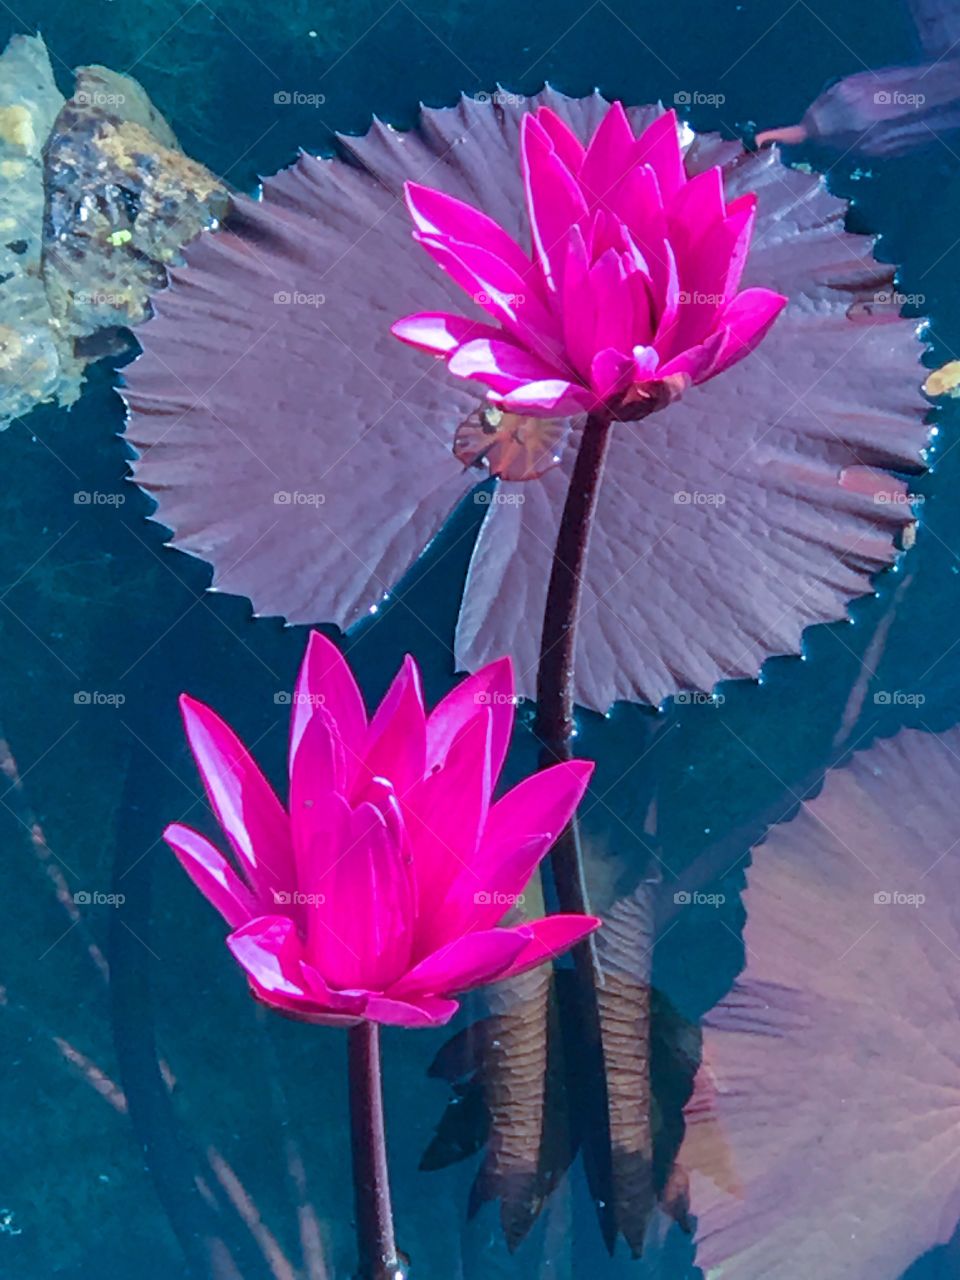 Lilies & lily pads ...as beautiful as they can be